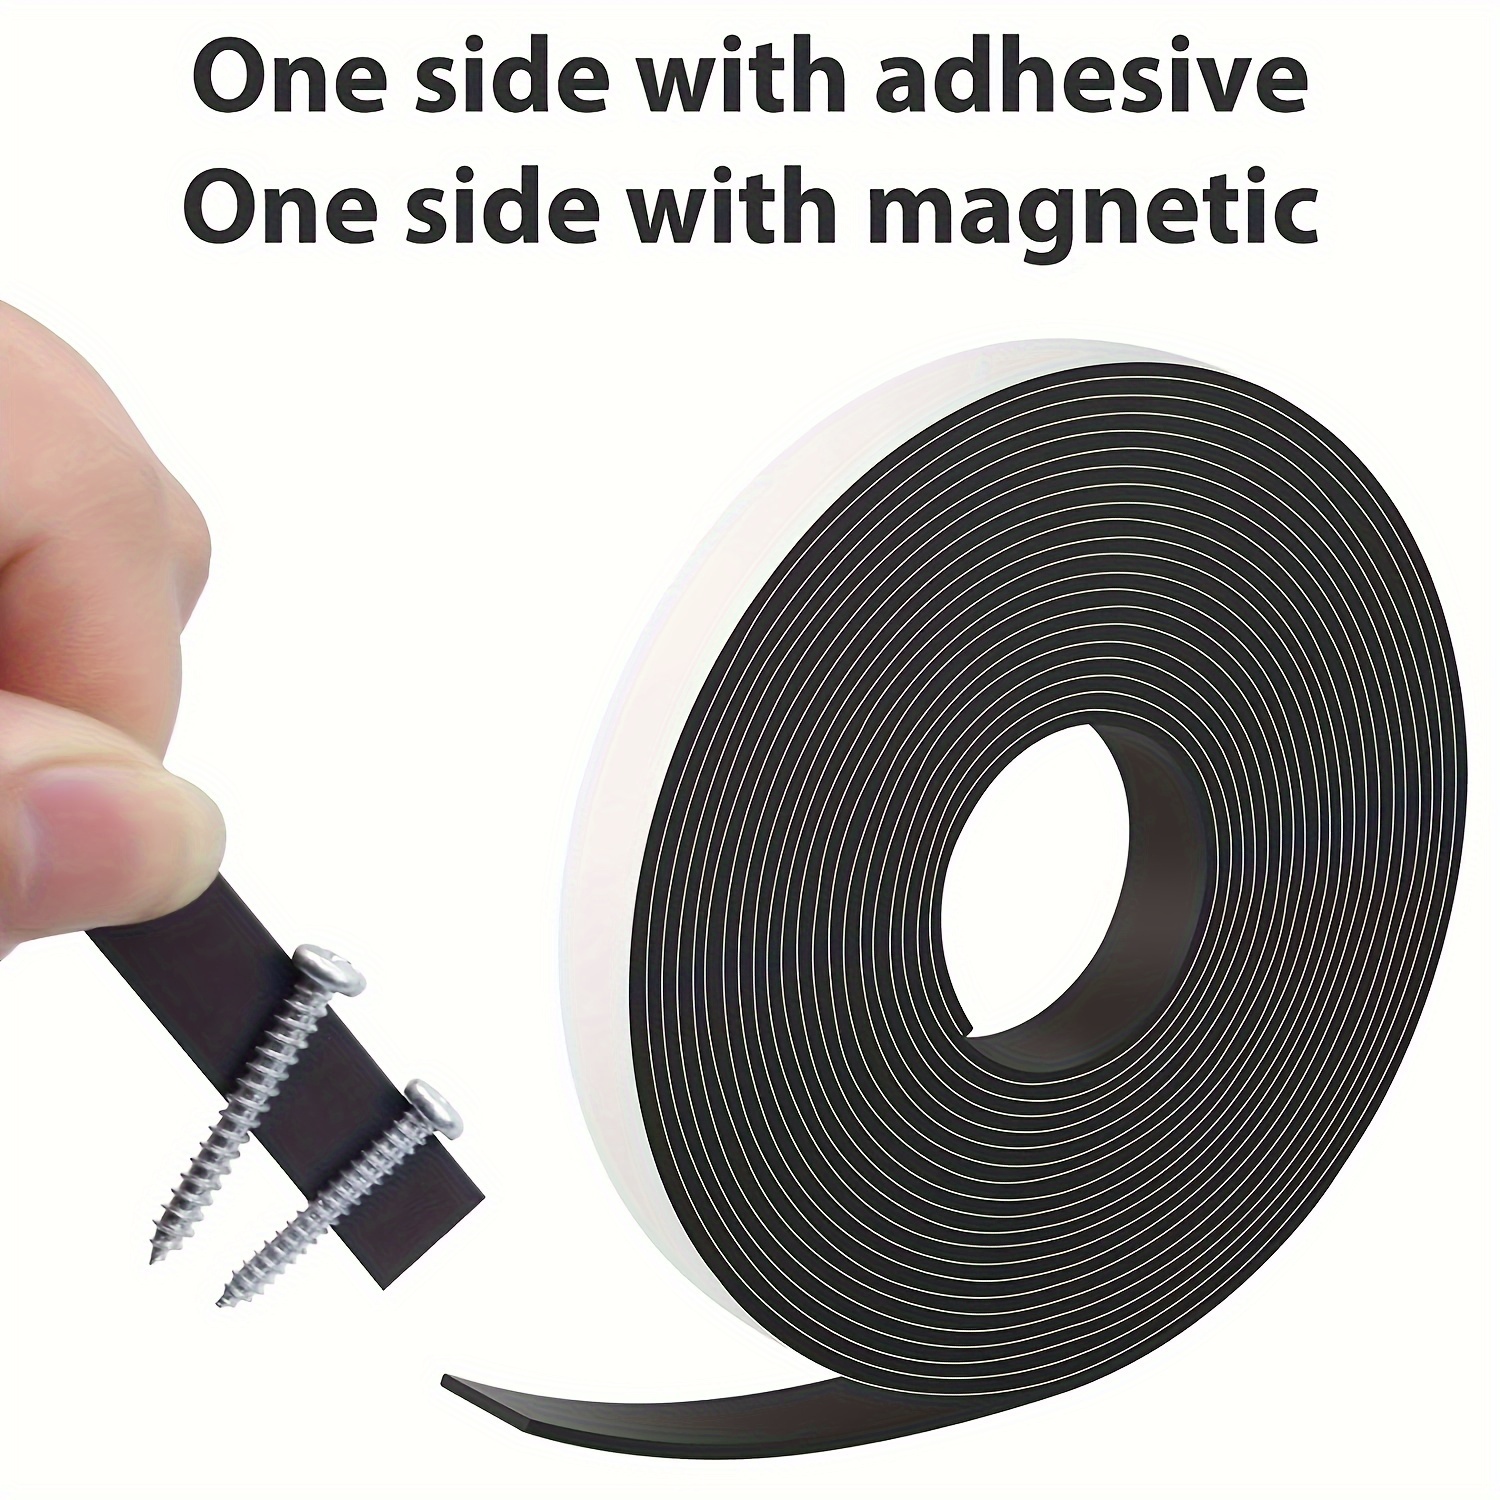 Magnetic Tape, Flexible Magnet Tape Strips Roll (1/2'' Wide x 18 ft Long)  with Strong 3M Adhesive Backing, Perfect for DIY, Art Projects, whiteboards